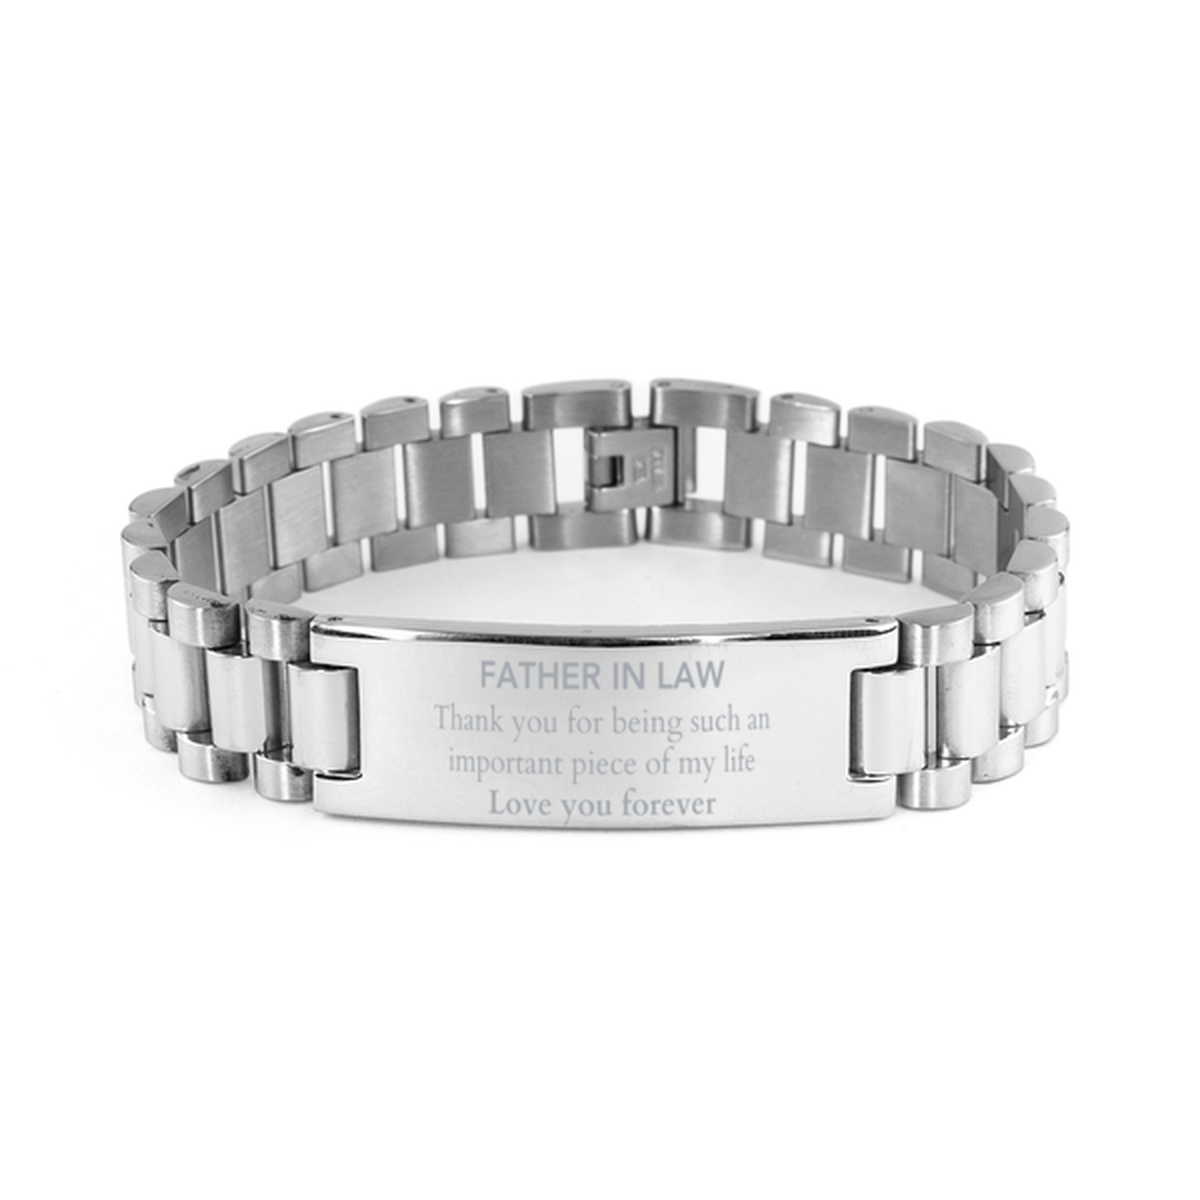 Appropriate Father In Law Ladder Stainless Steel Bracelet Epic Birthday Gifts for Father In Law Thank you for being such an important piece of my life Father In Law Christmas Mothers Fathers Day